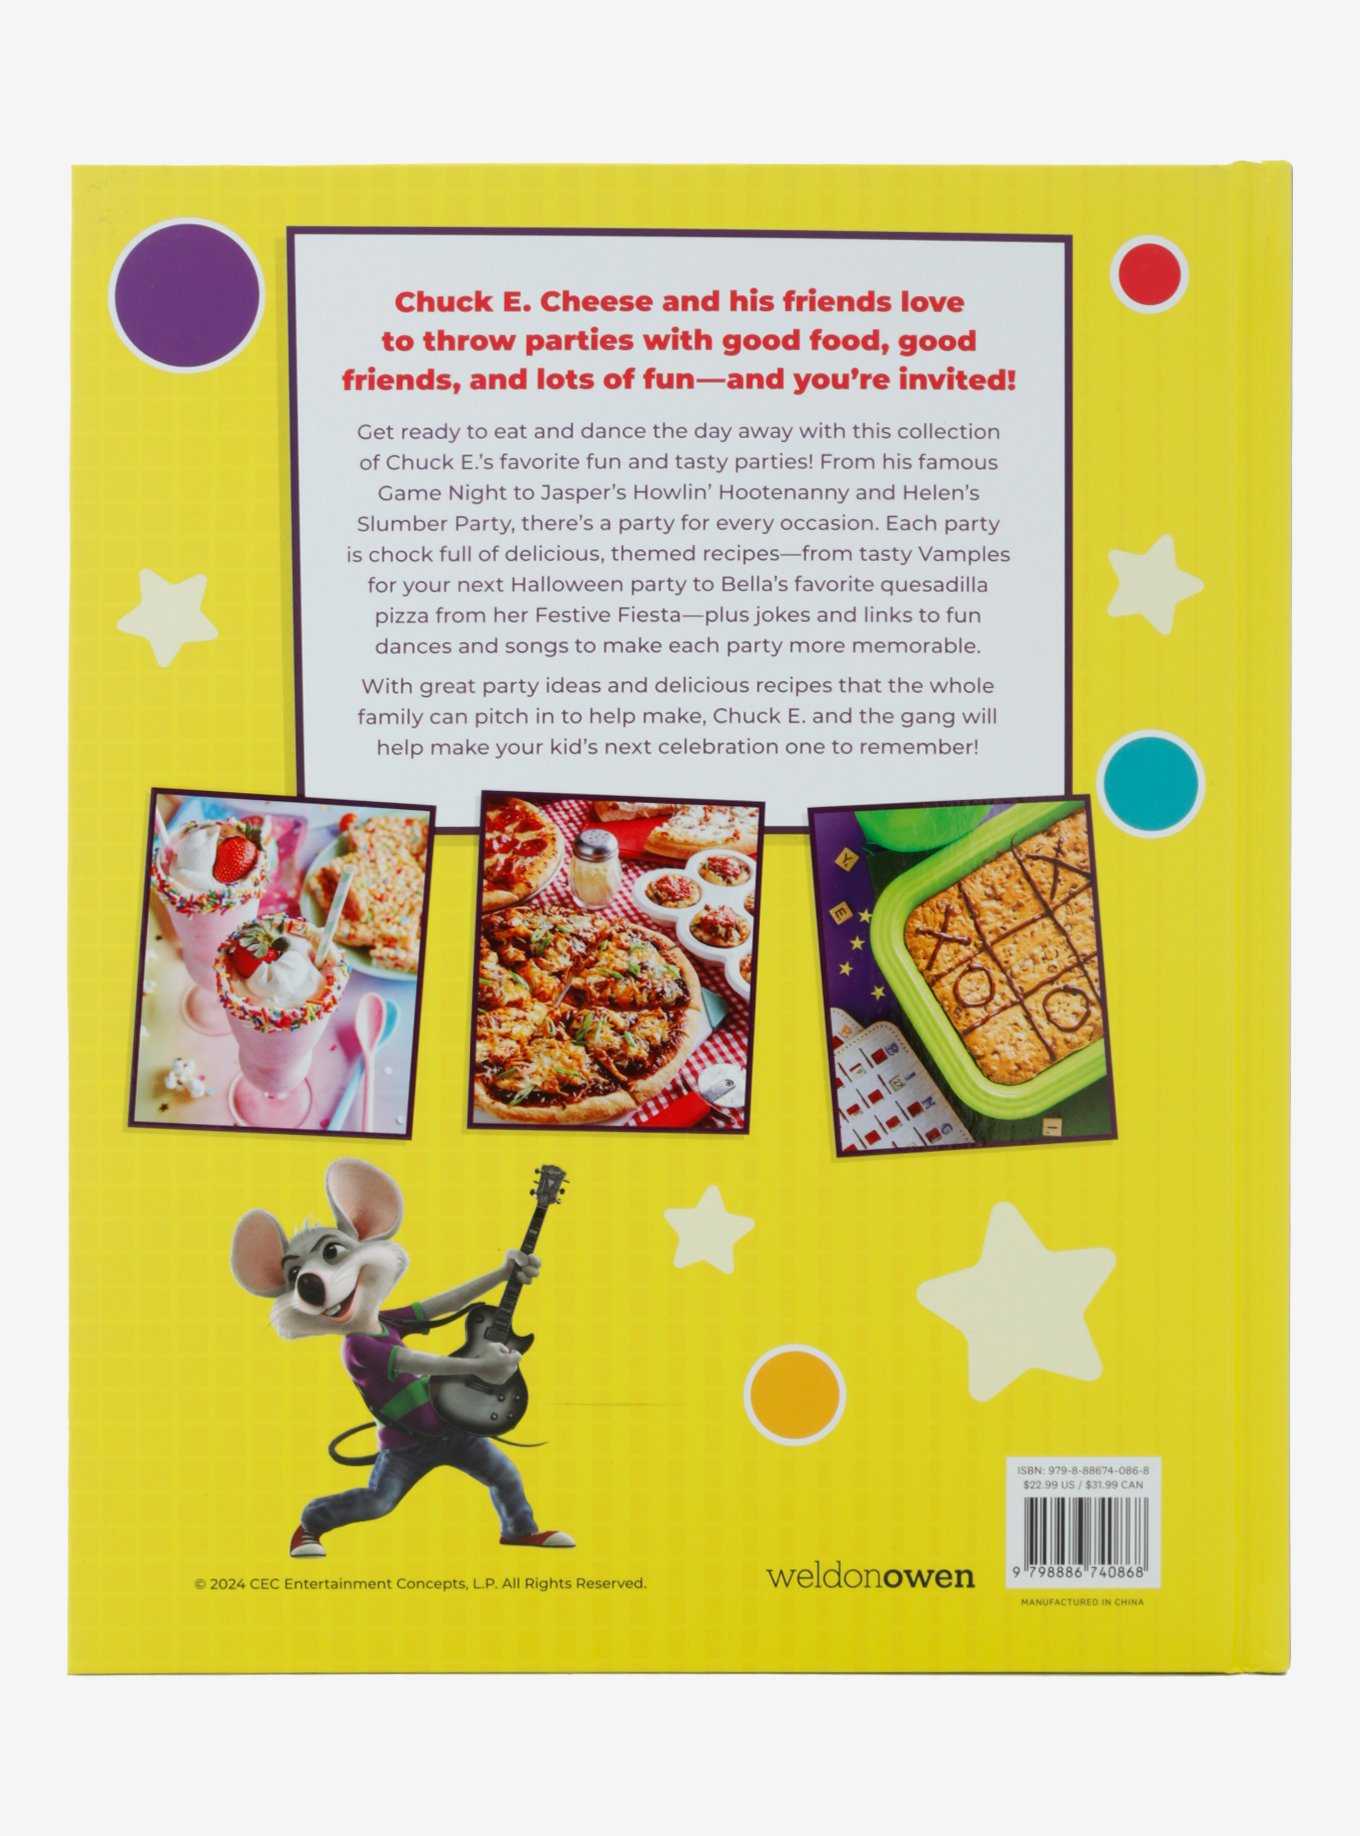 Chuck E. Cheese and Friends Party Cookbook, , hi-res